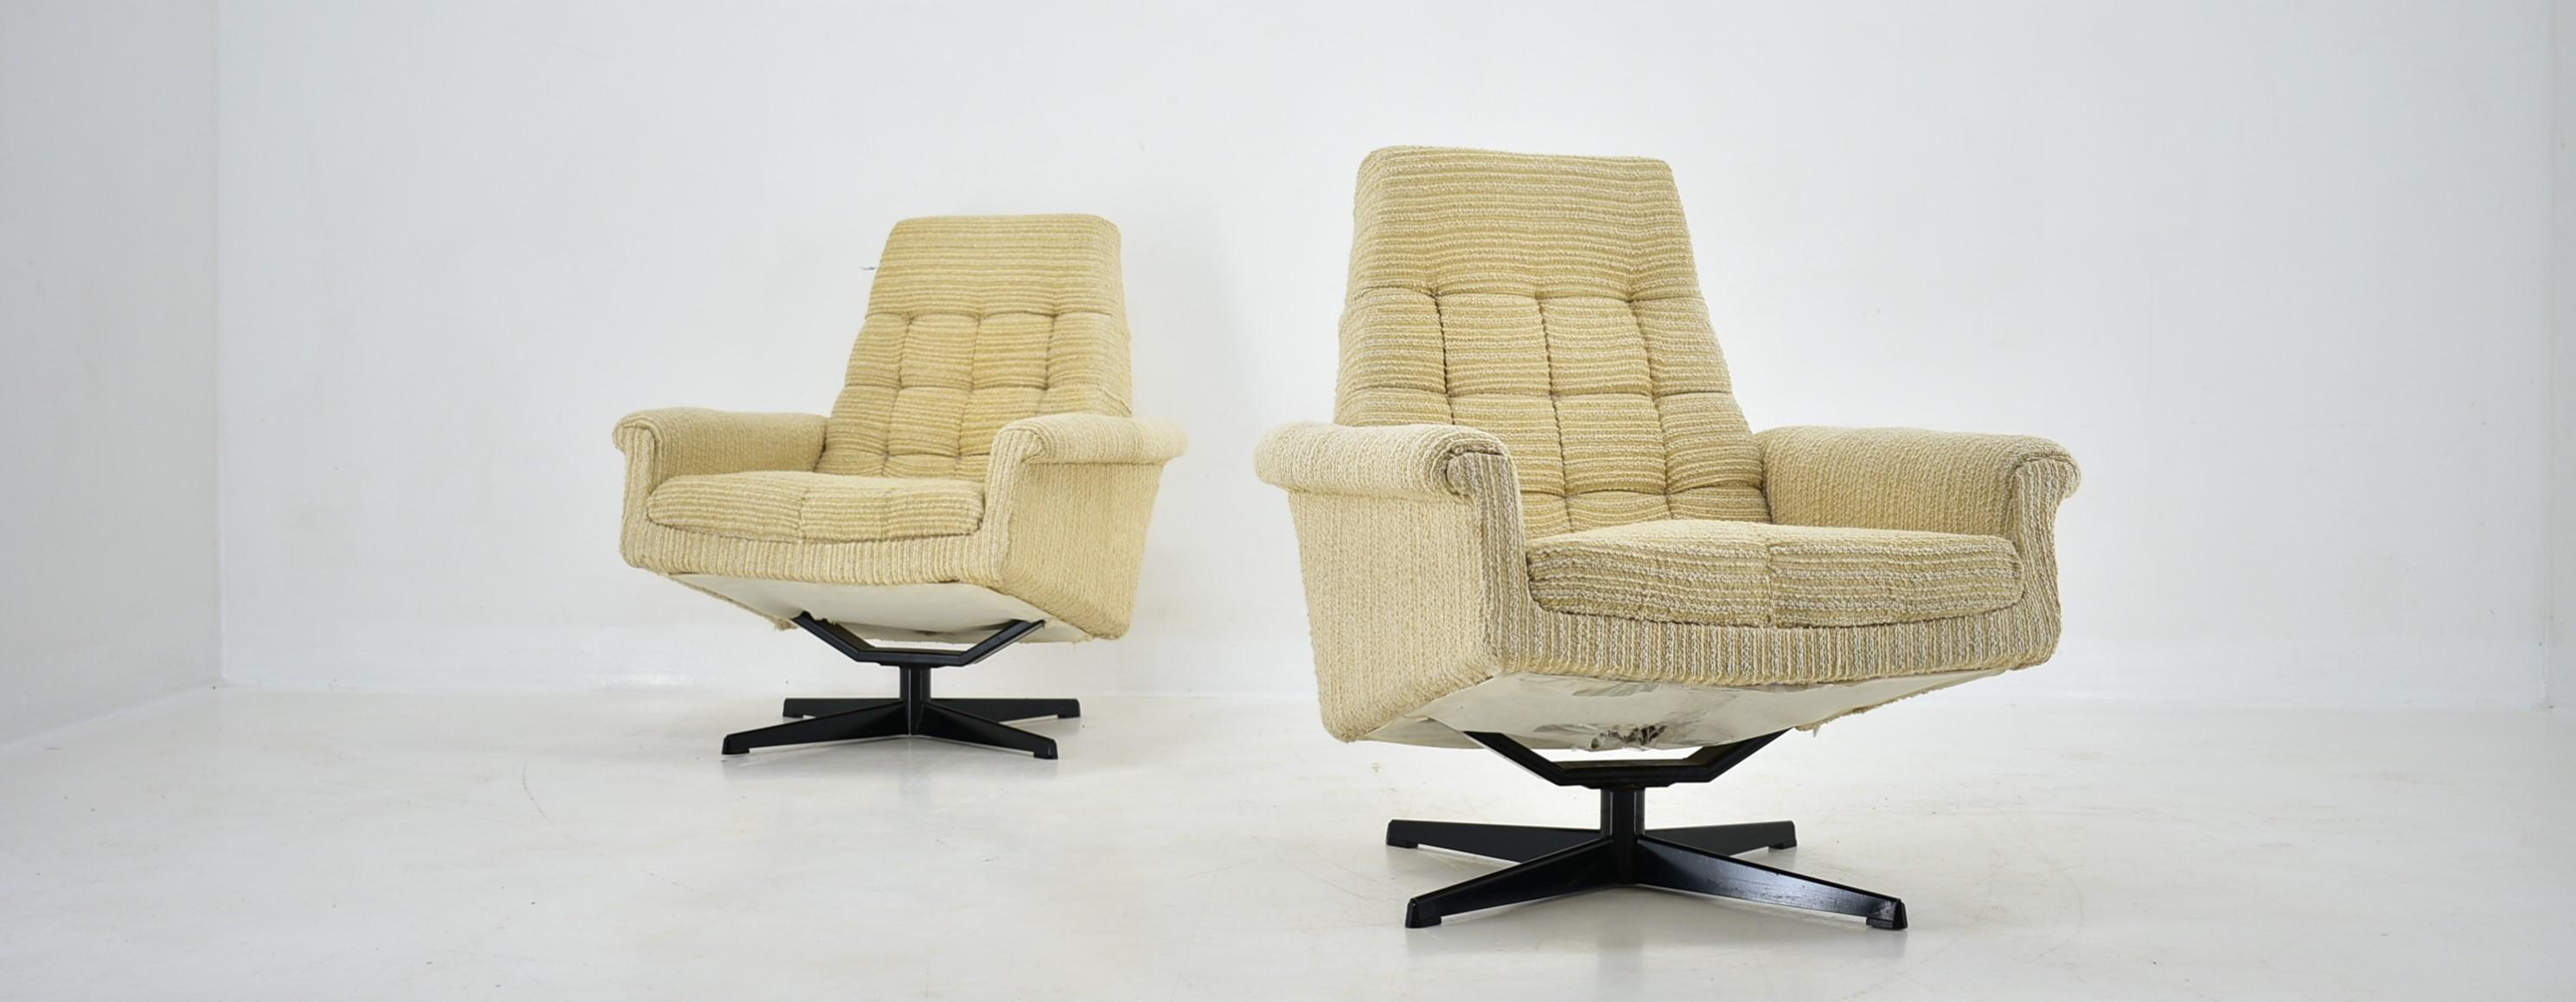 Pair of Armchairs, Tabouret by Morávek a Munzar, 1968s For Sale 11